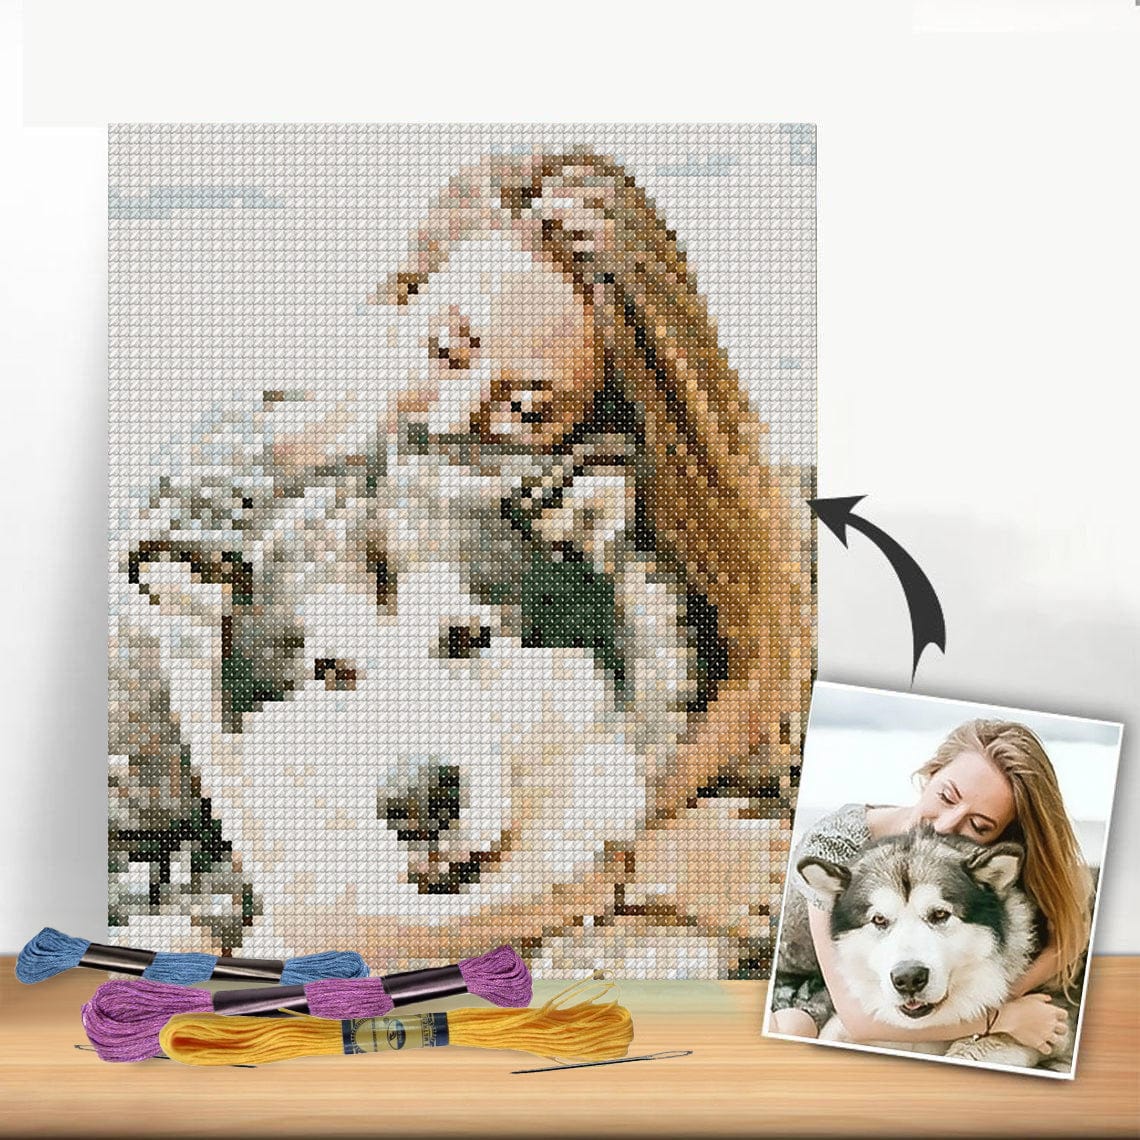 Cross Stitch | Rat - White And Brown Hamster On White Surface - Cross Stitched